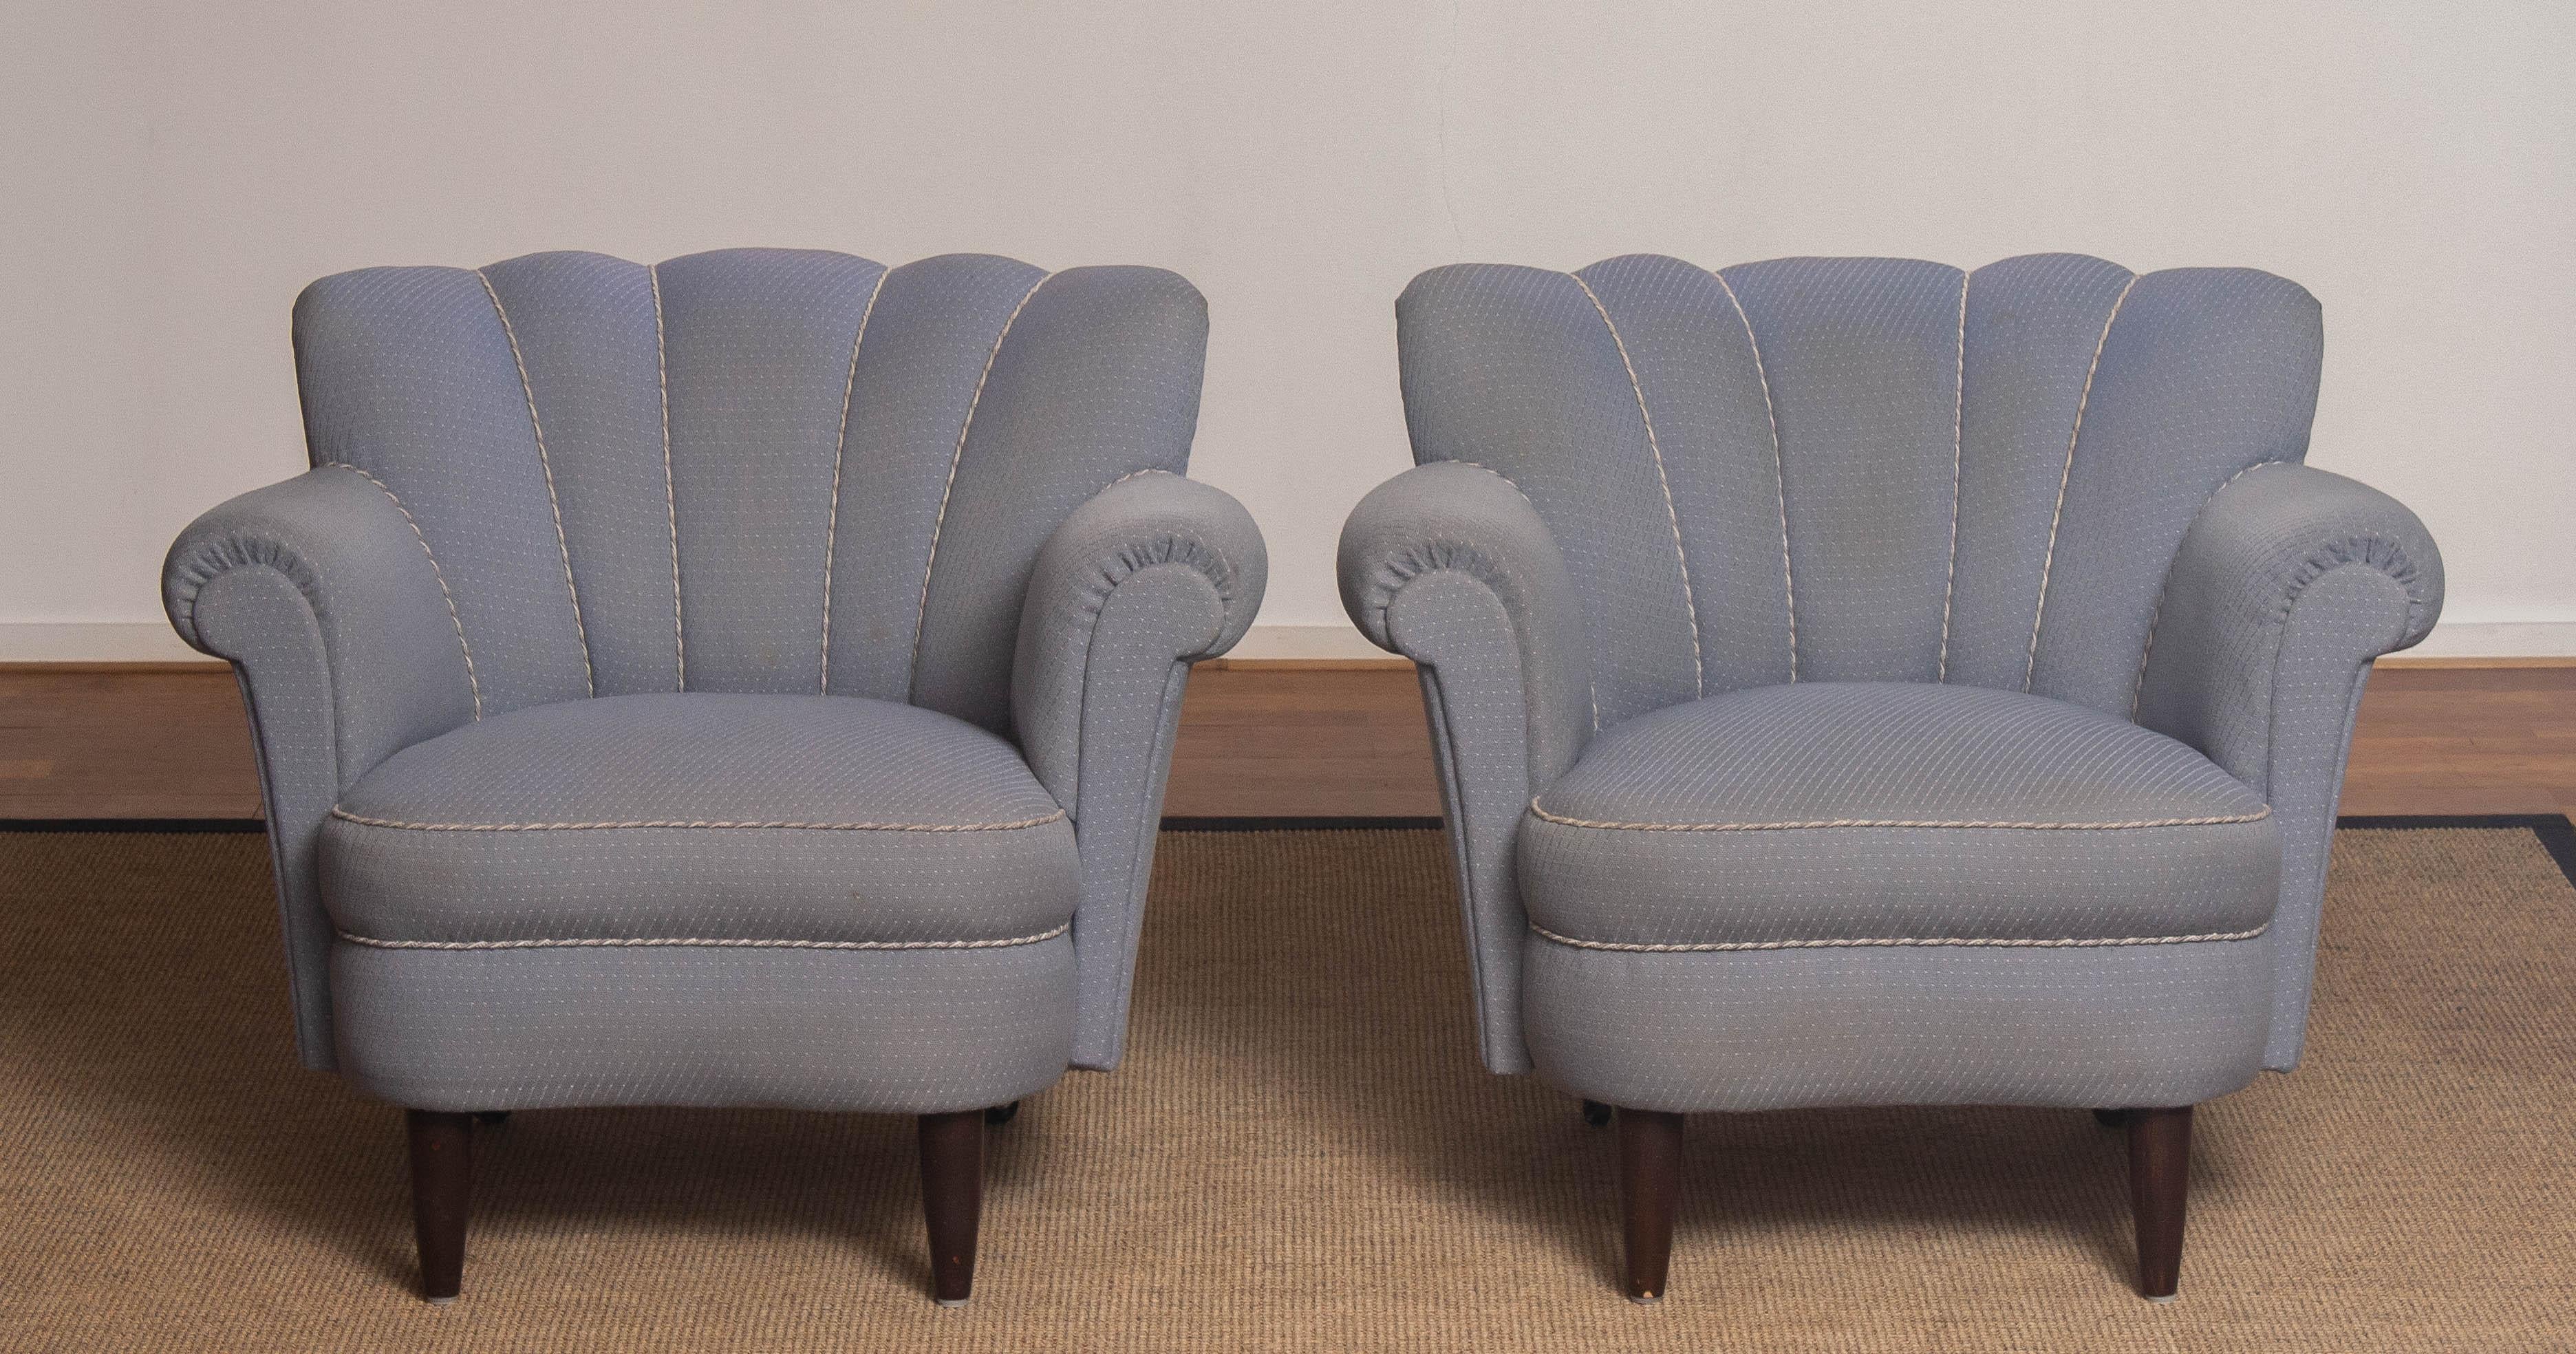 Beautiful designed shell-back chairs attributed to Carl-Johan Boman for Boman Oy Finland.
Overall the chairs are in good condition and sit and support very good. The wool upholstery shows stains and therefor we advice re-upholstery.
 